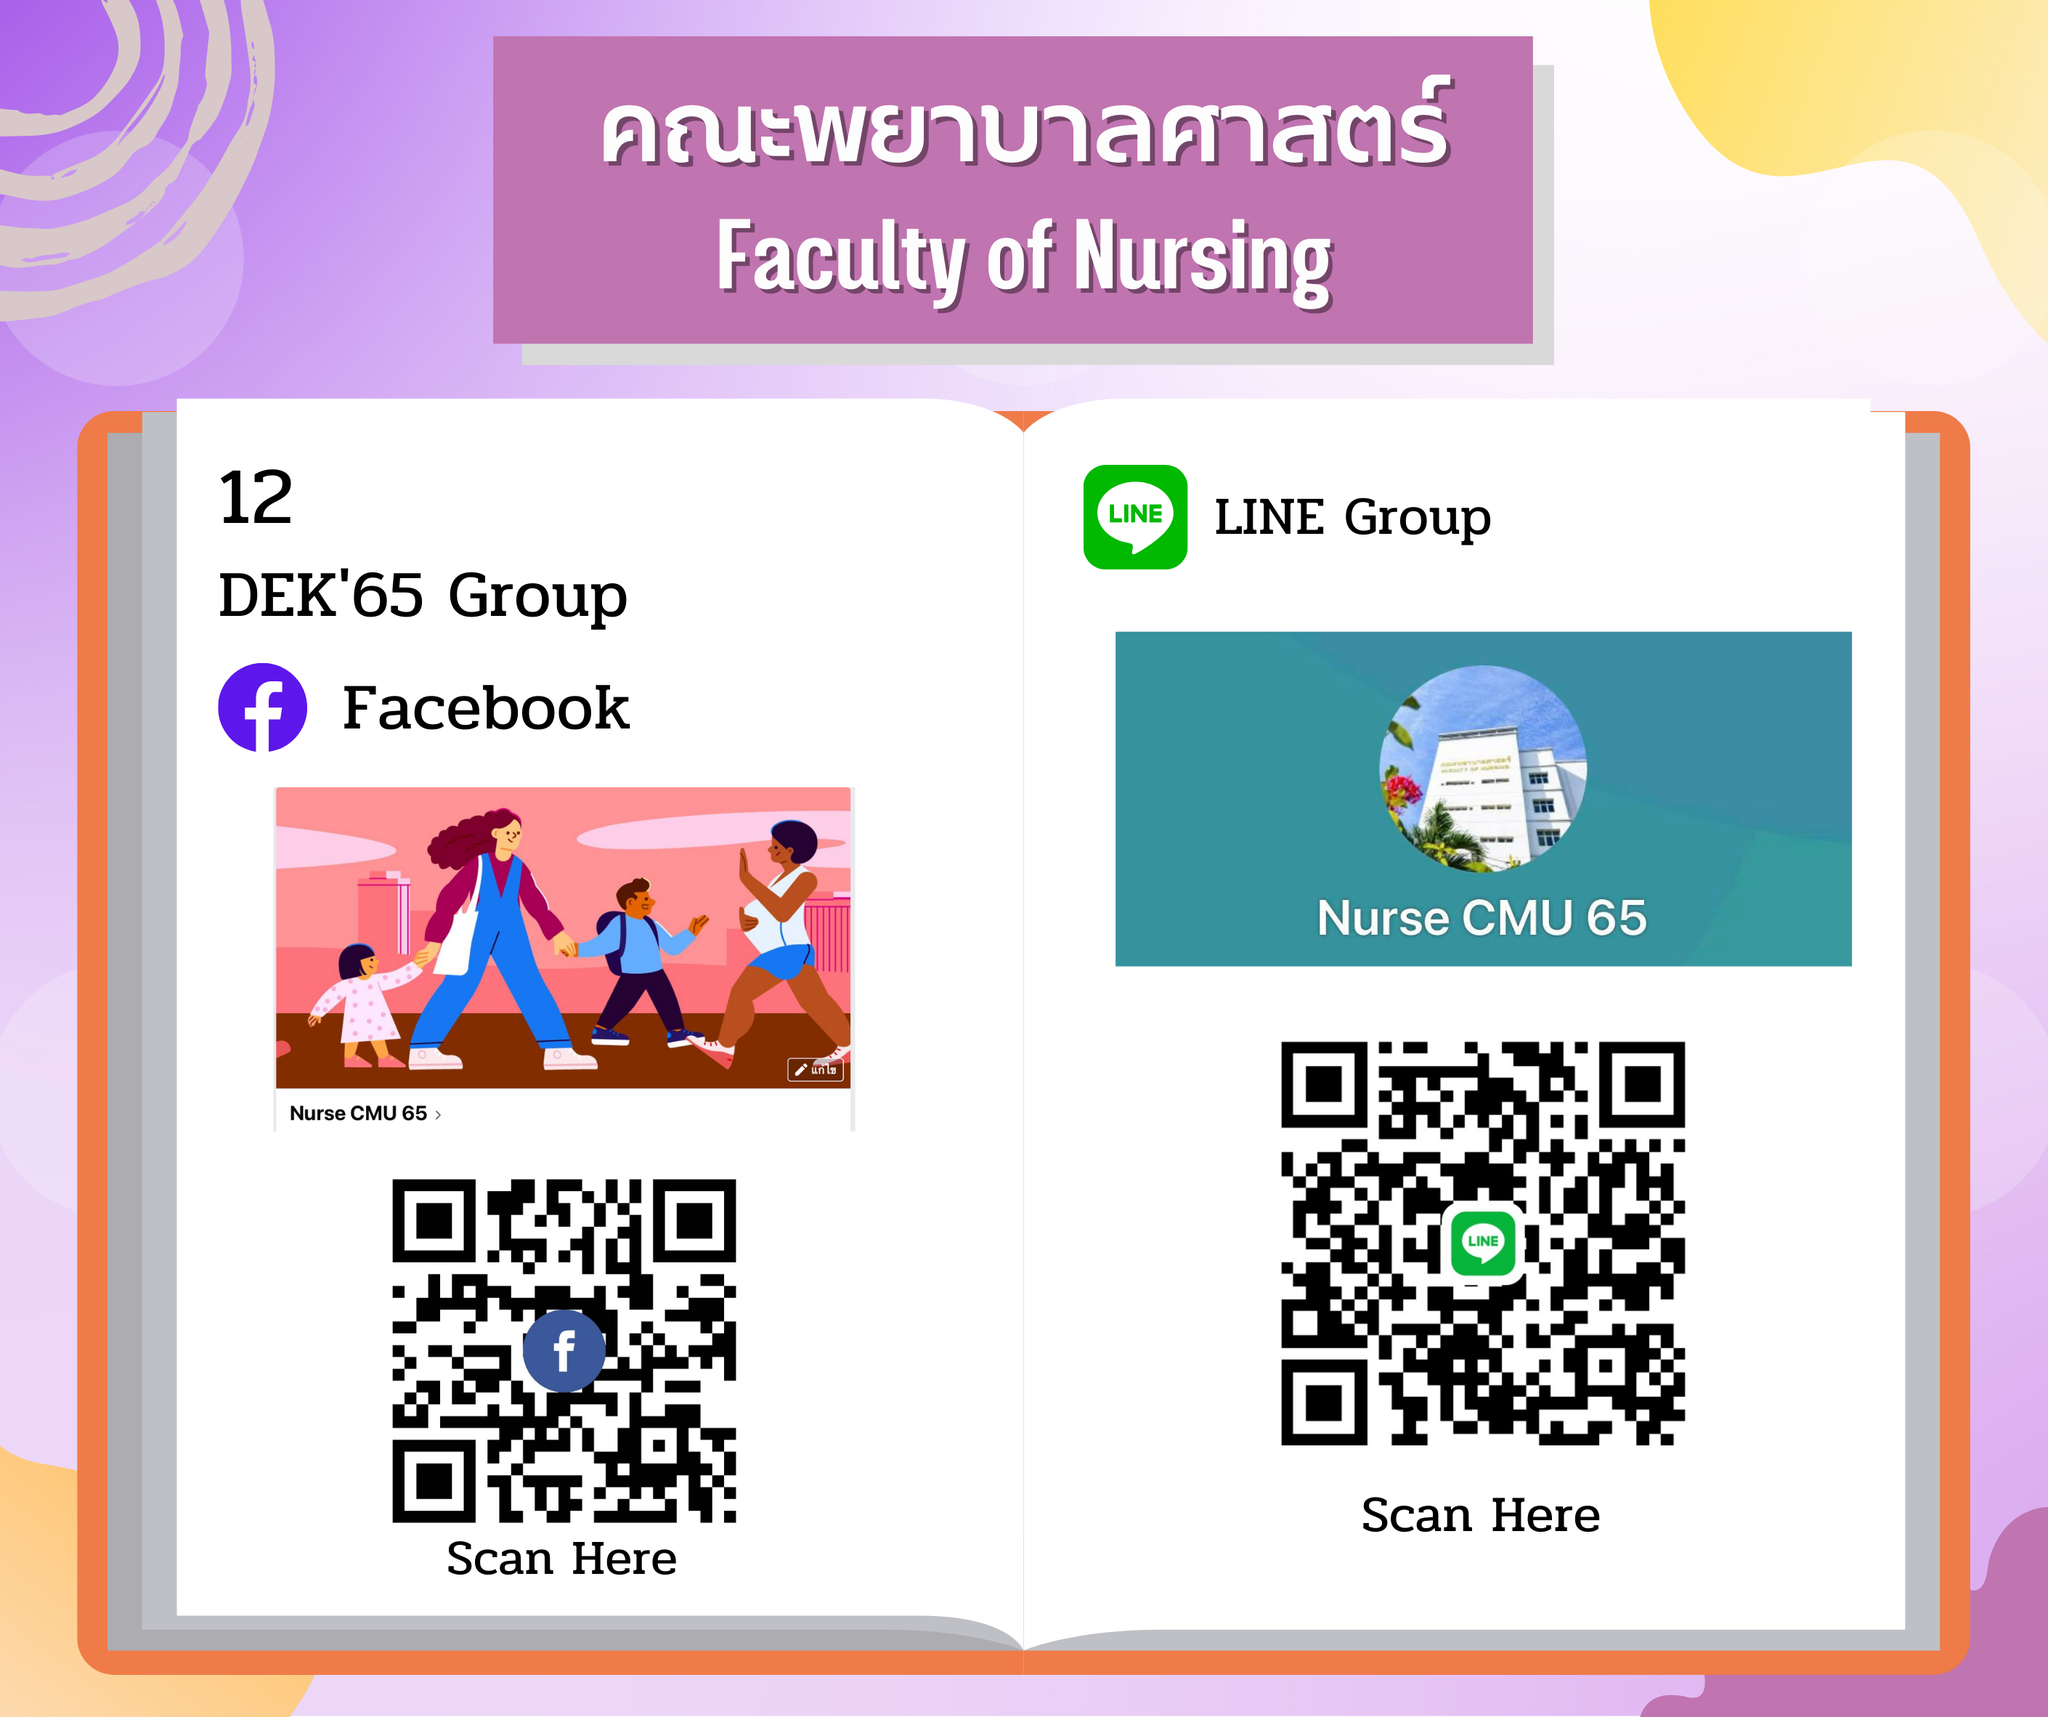 Student Union of Faculty of Nursing